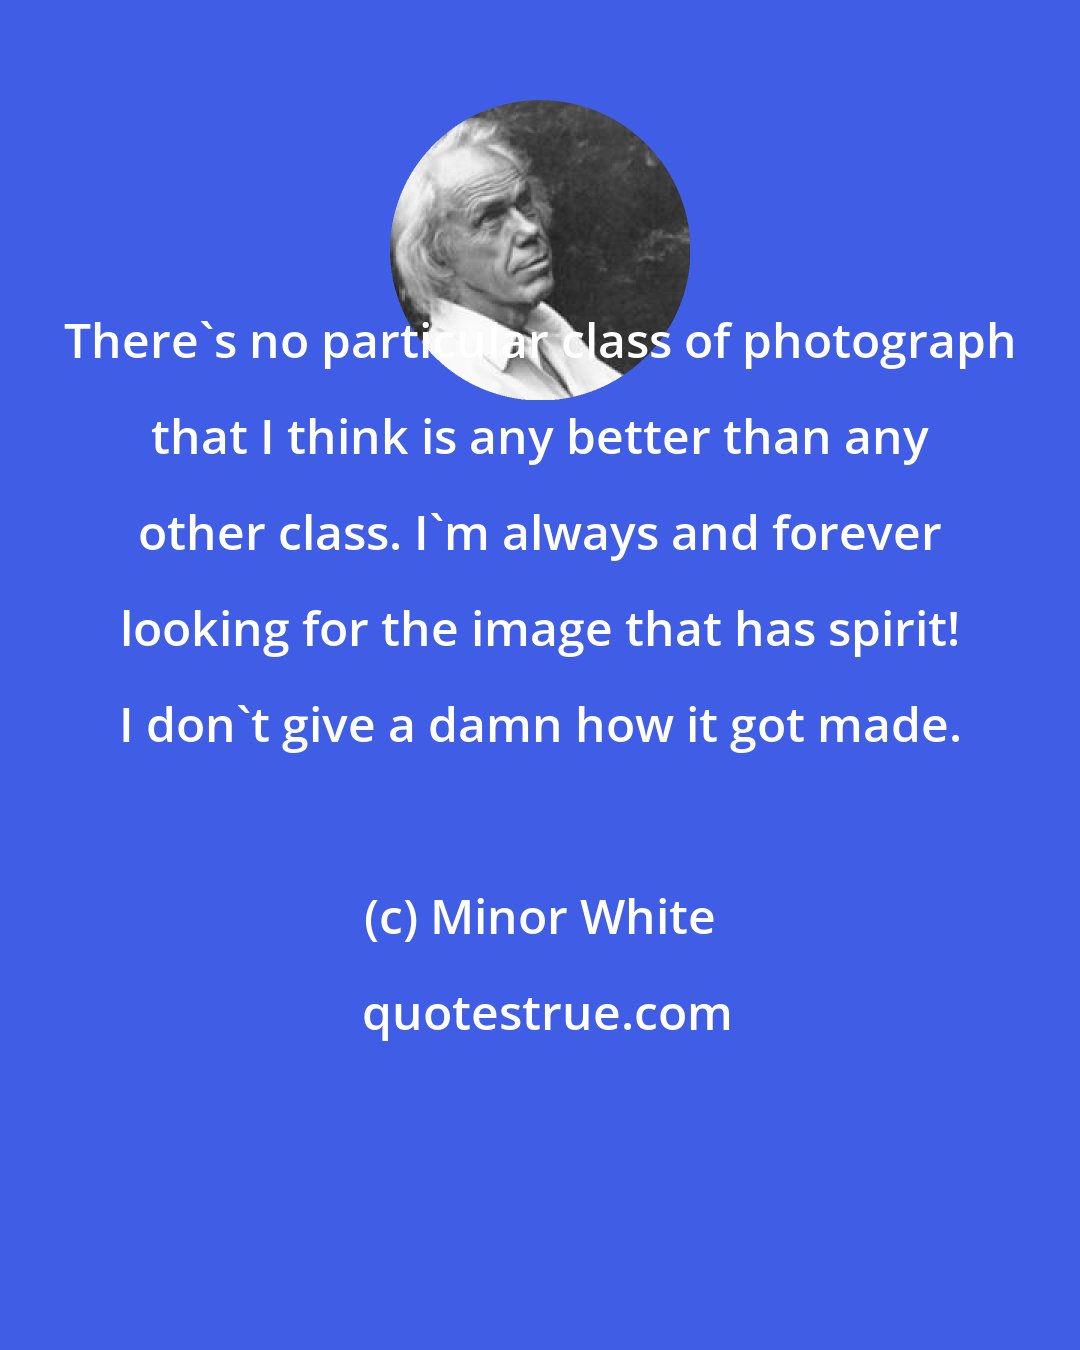 Minor White: There's no particular class of photograph that I think is any better than any other class. I'm always and forever looking for the image that has spirit! I don't give a damn how it got made.